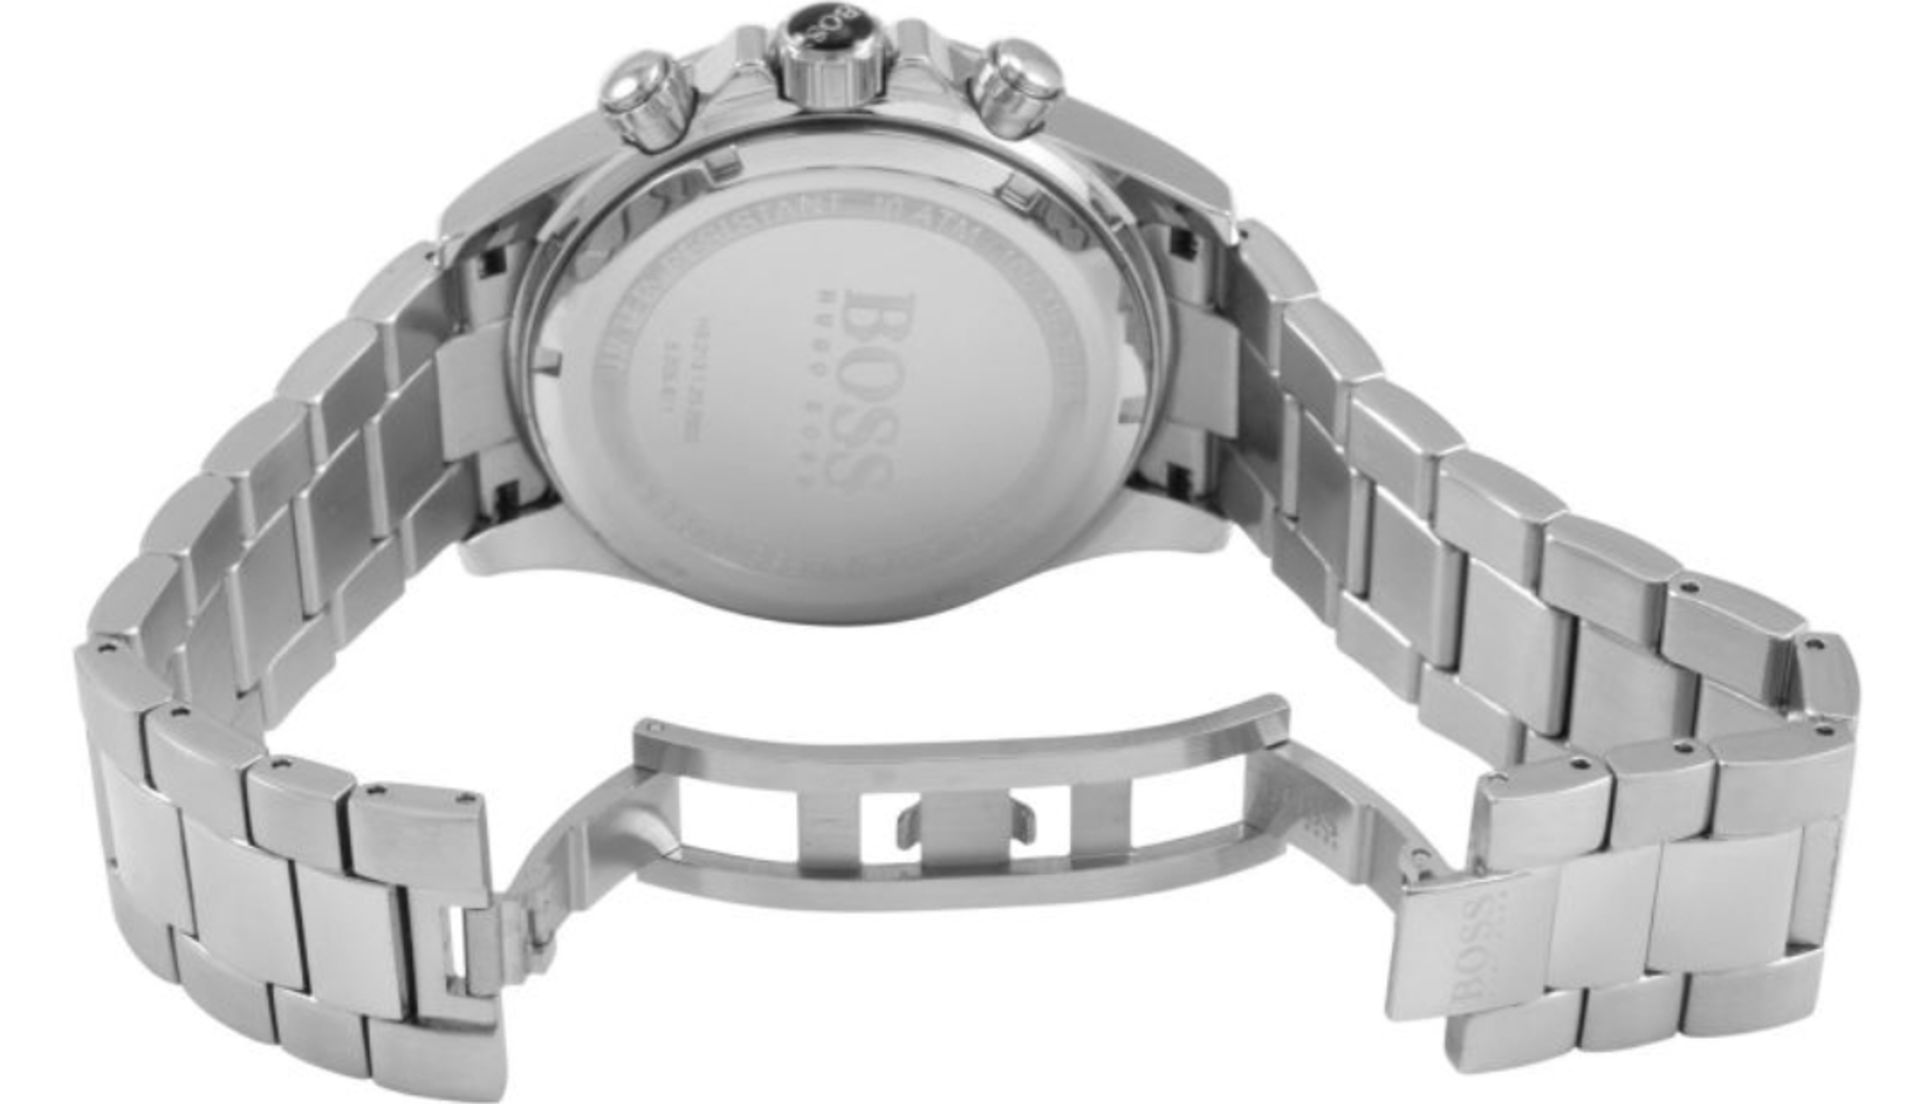 Hugo Boss Men's Ikon Silver Bracelet Chronograph Watch 1512962æ Rugged And Purposeful Whilst - Image 4 of 4